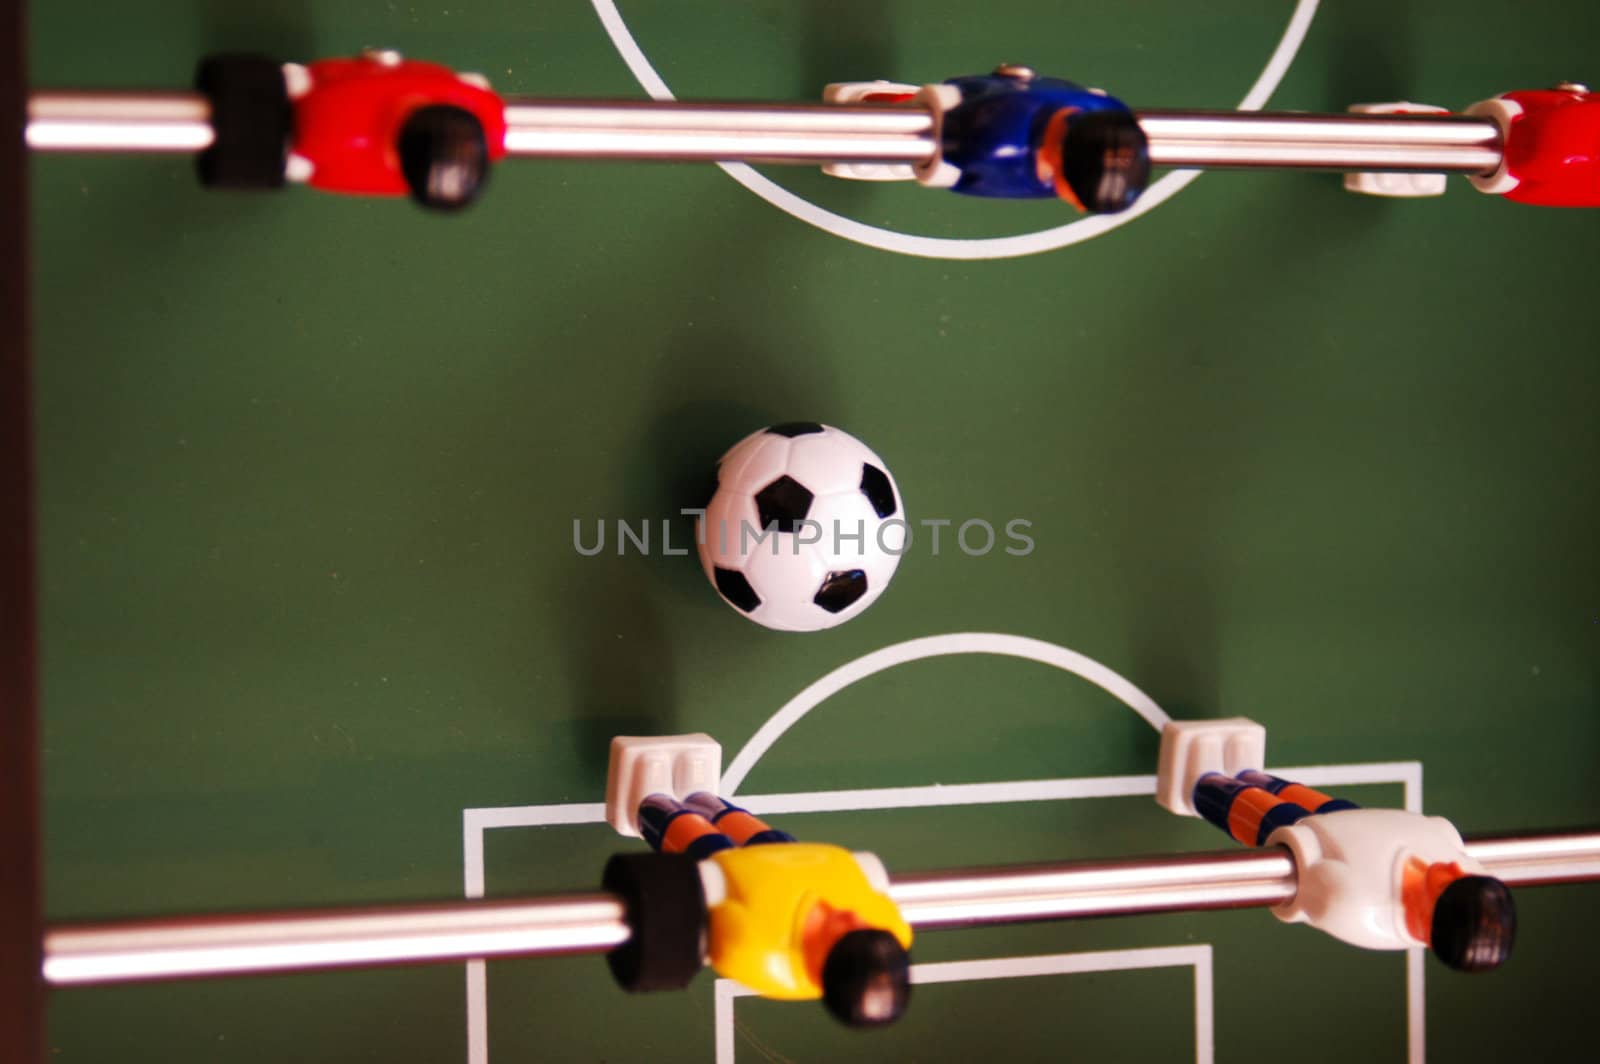 rolling ball on a foosball table